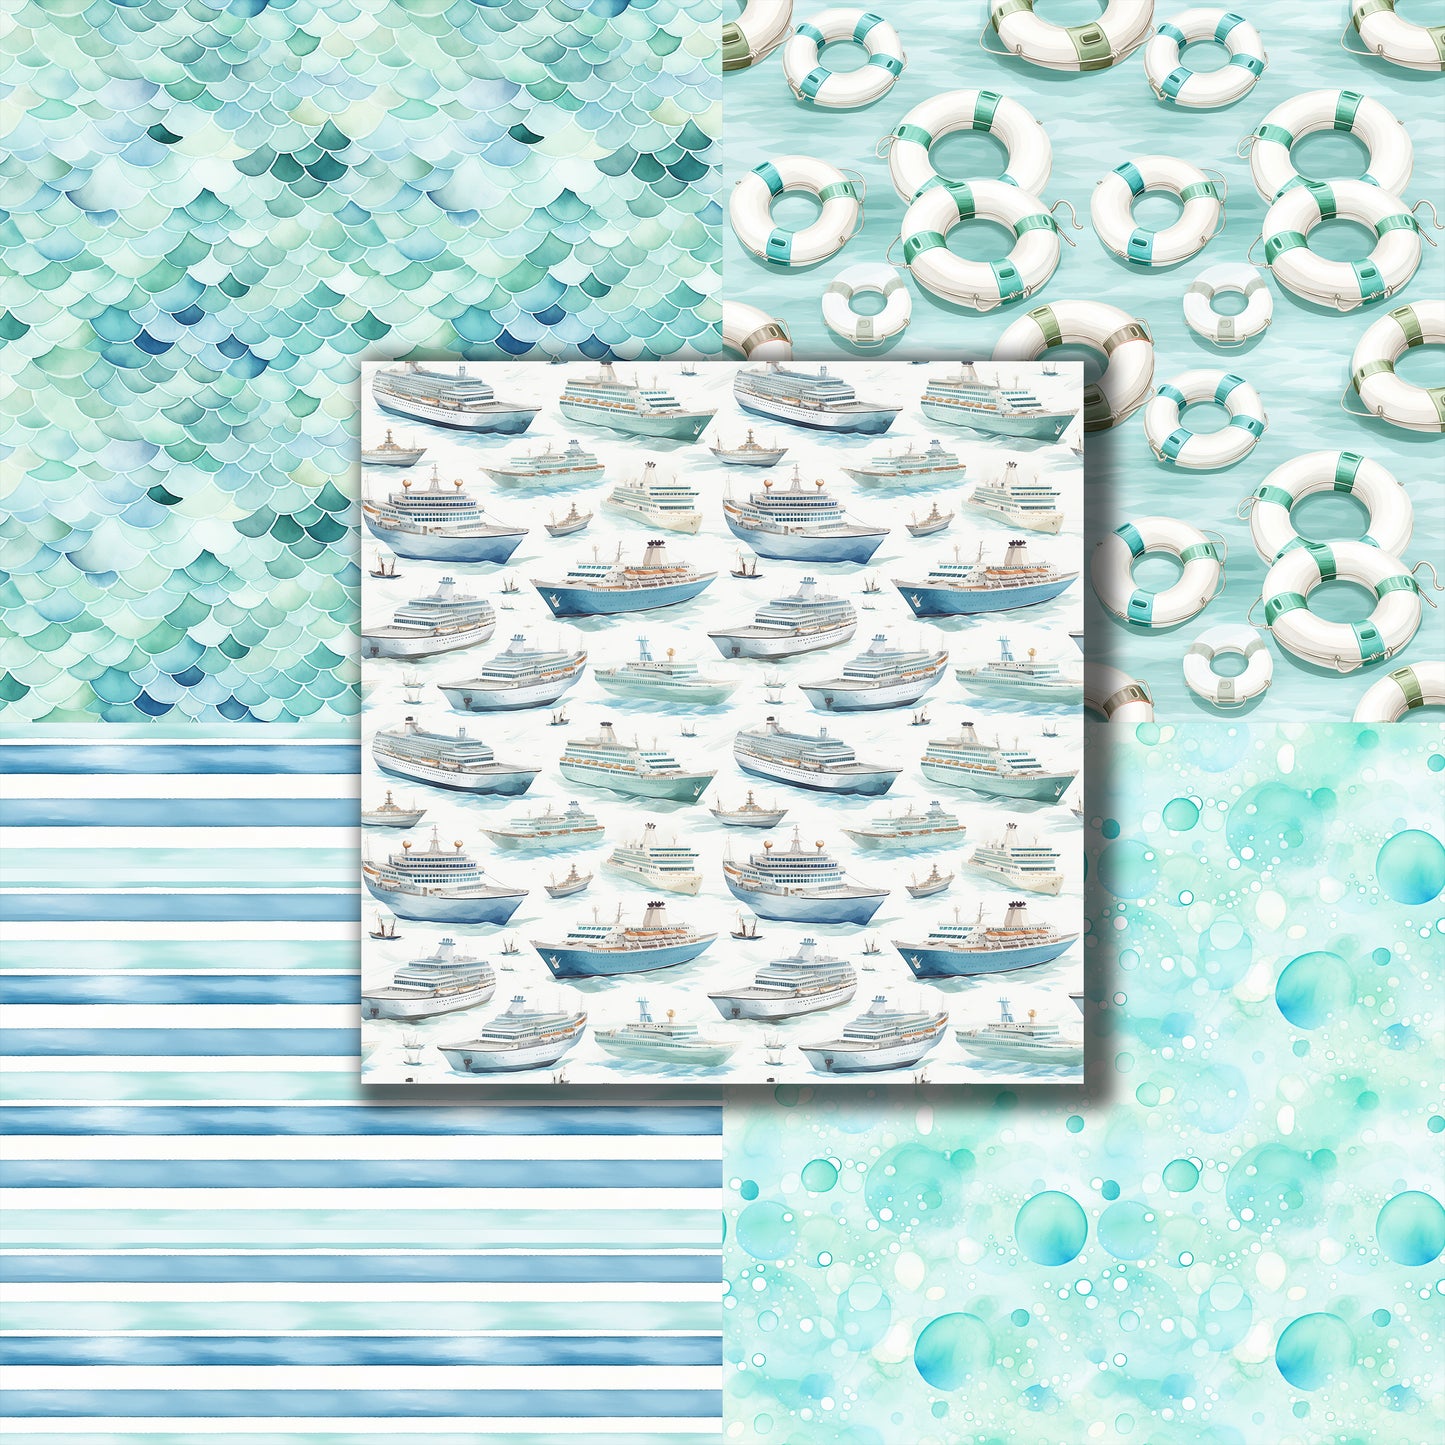 Let's Cruise 12X12 Scrapbook Paper Pack - 8836